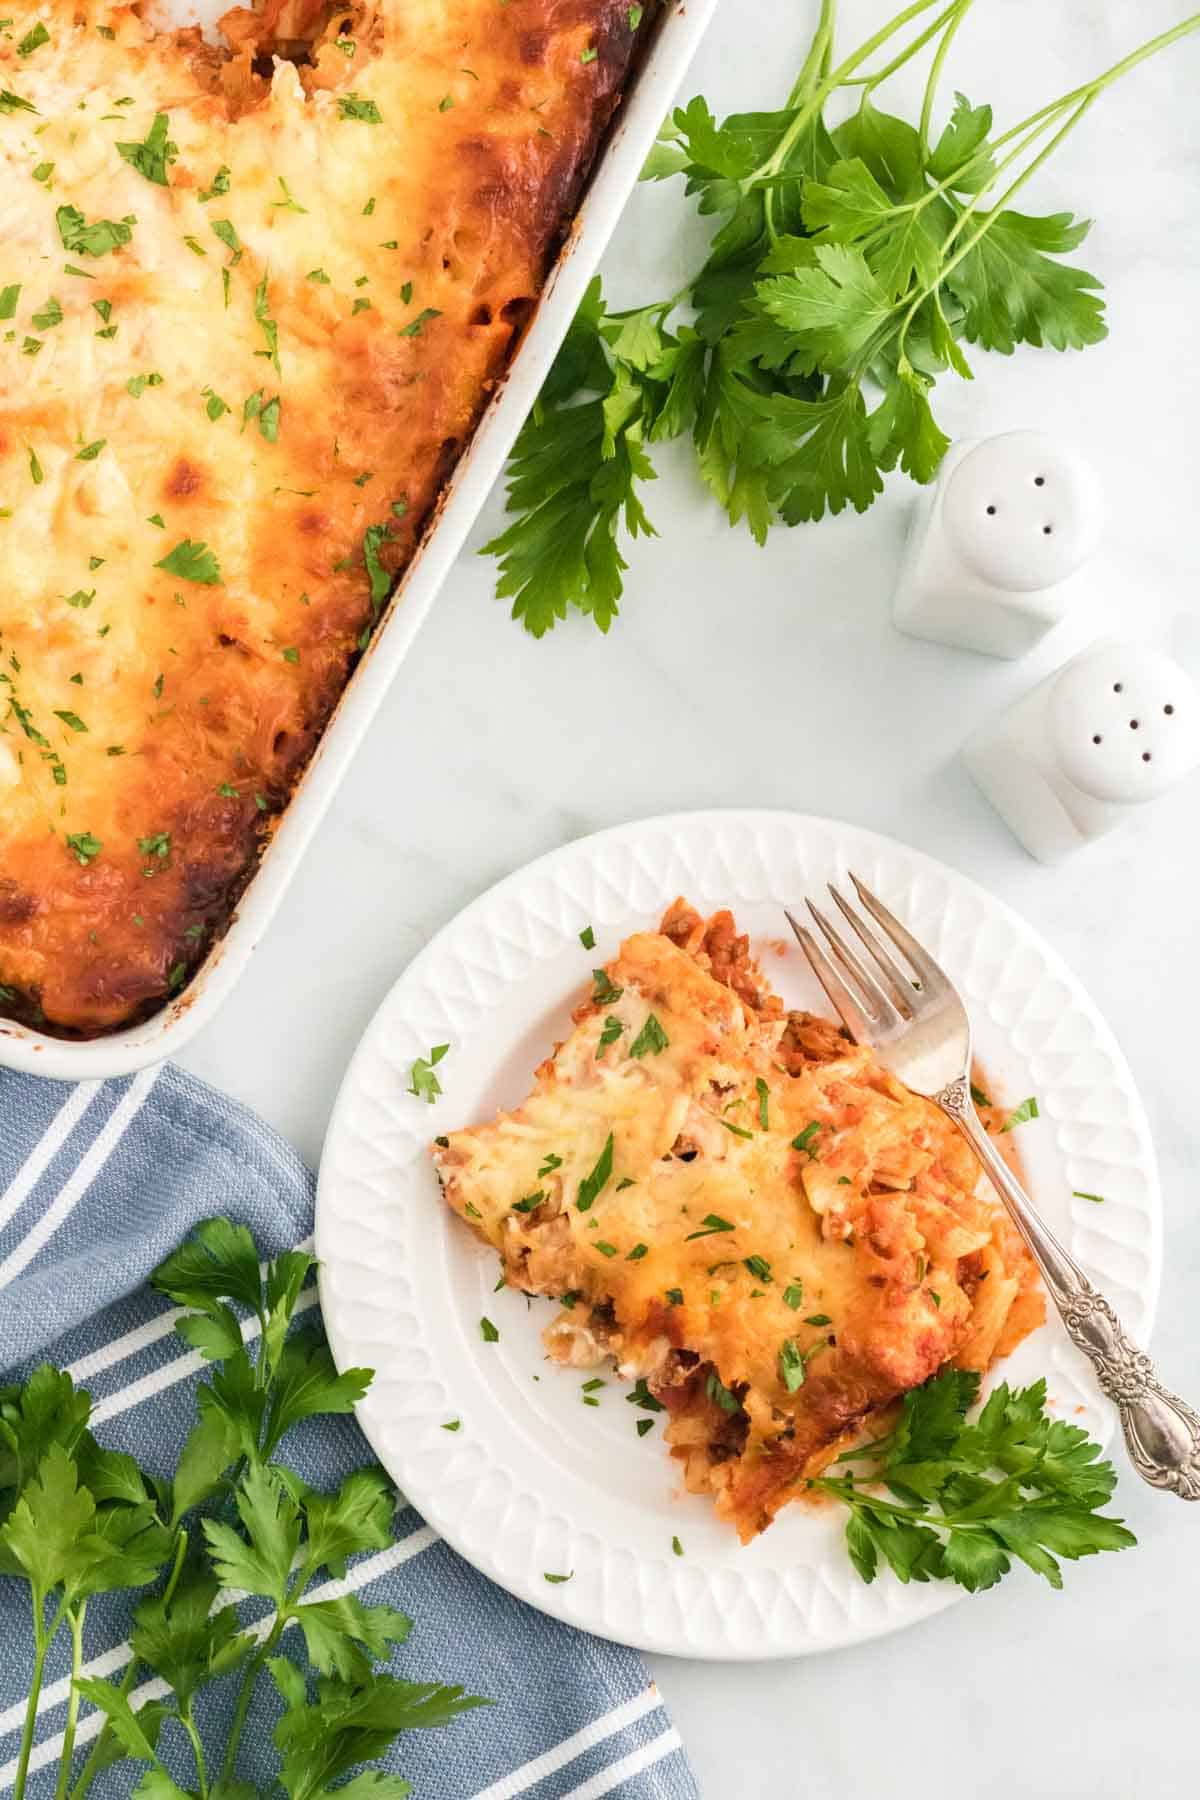 A slice of baked ziti on a plate next to a casserole dish.